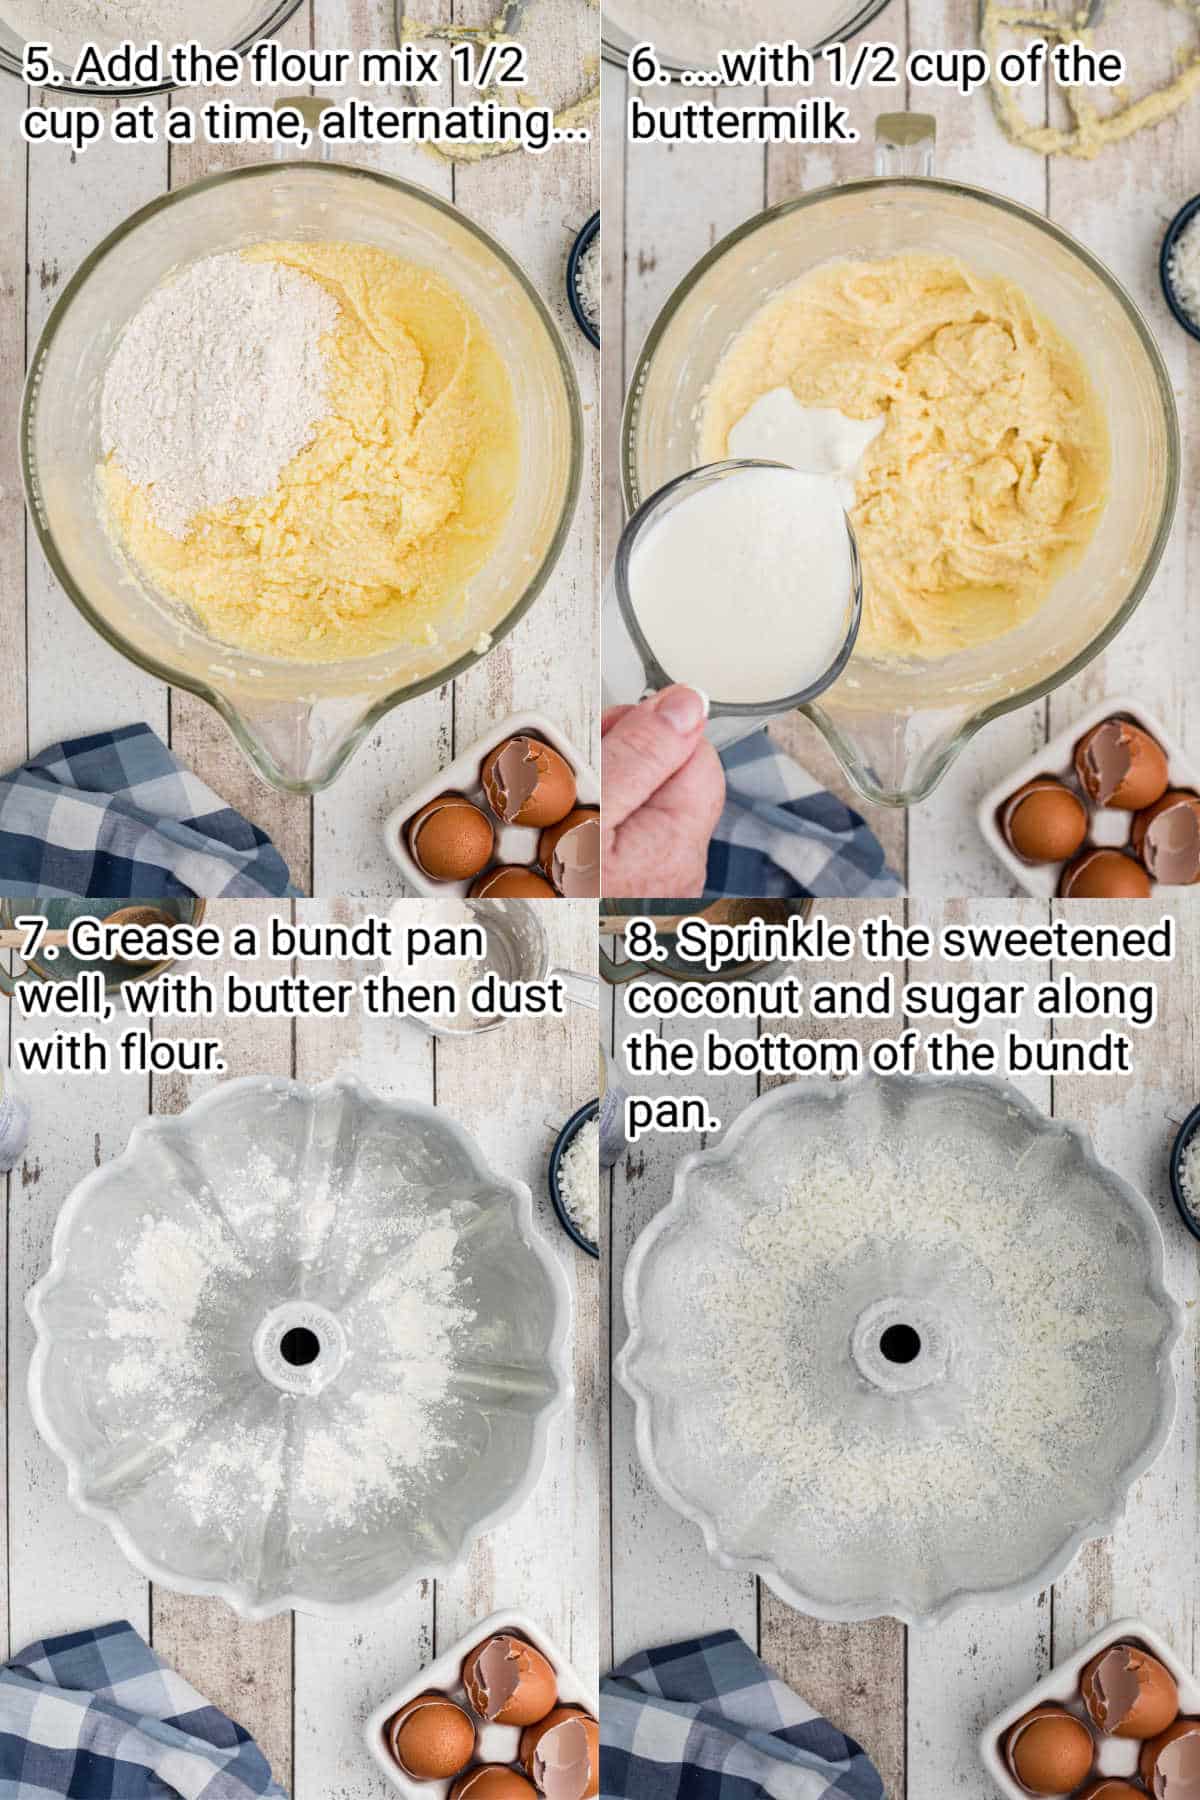 four images showing steps how to make a louisiana crunch cake